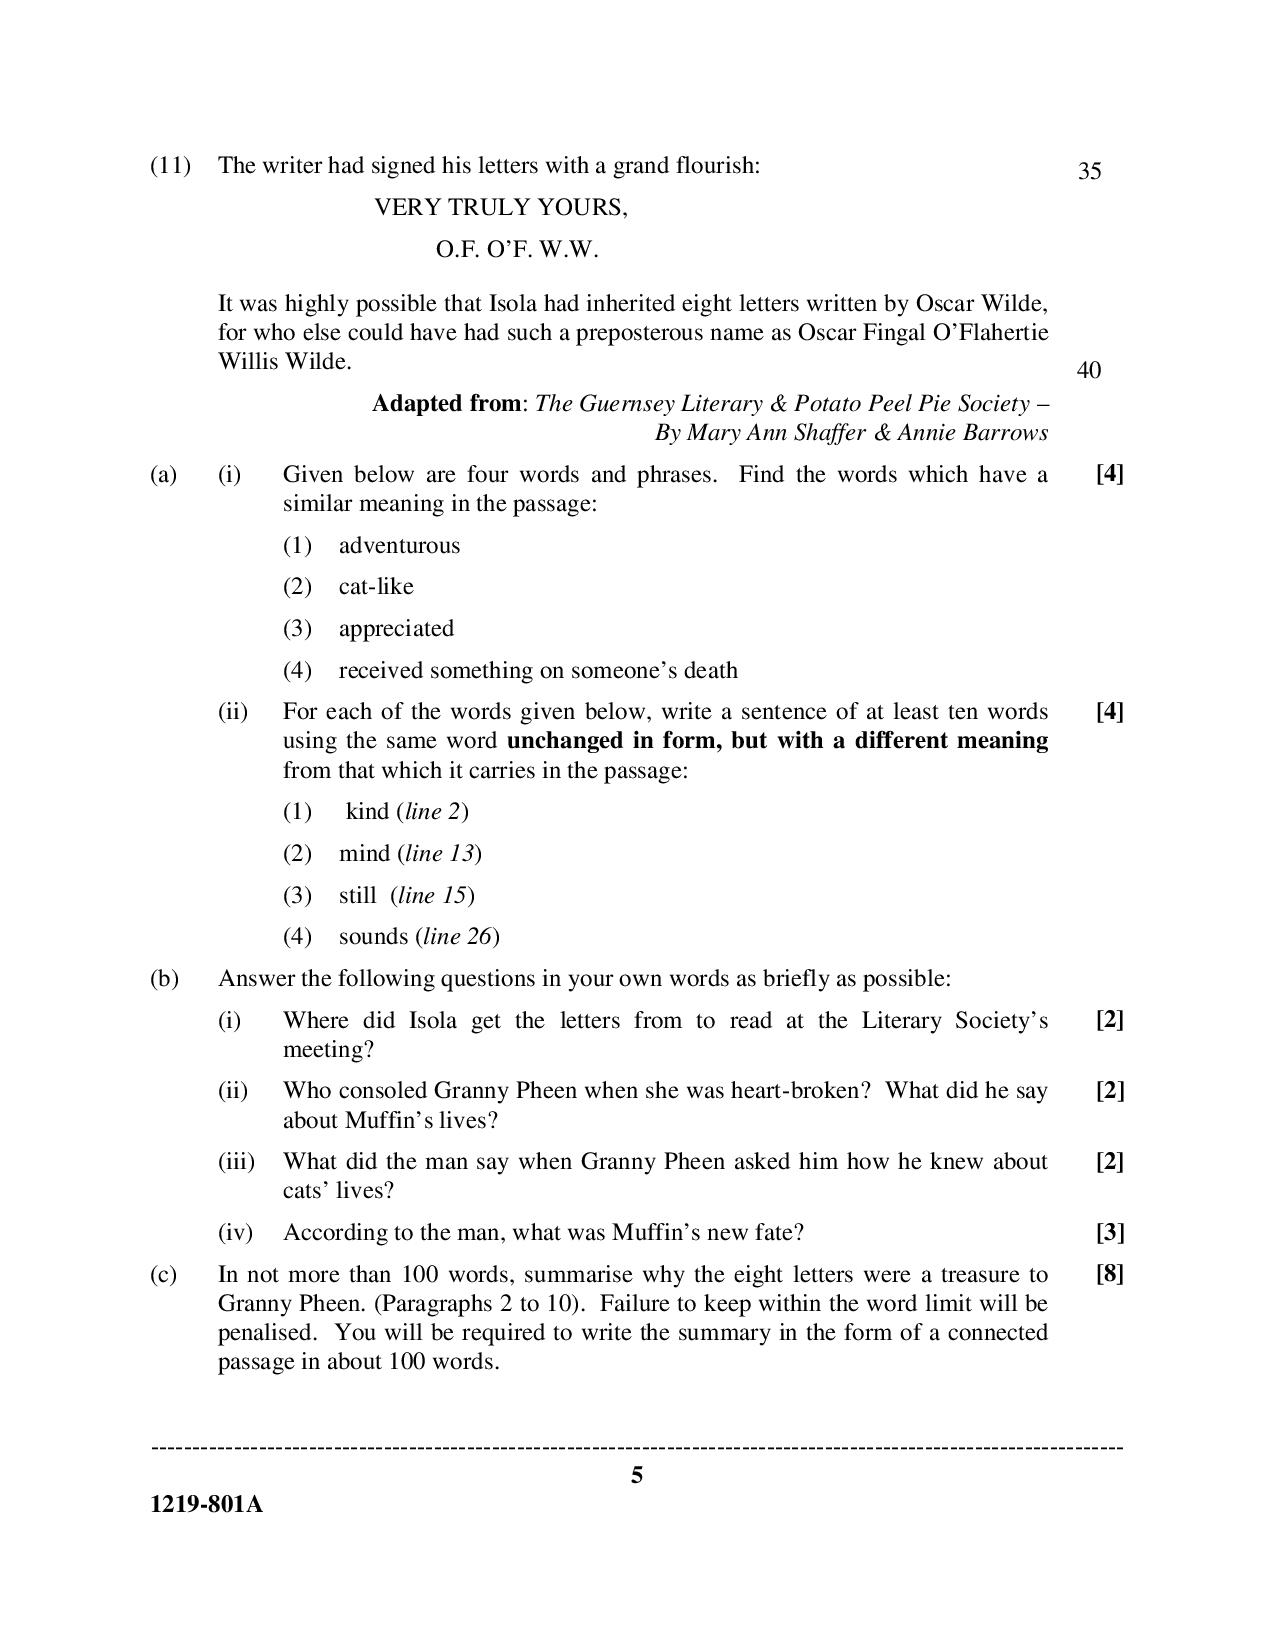 ISC Class 12 English Language 2019 Question Paper